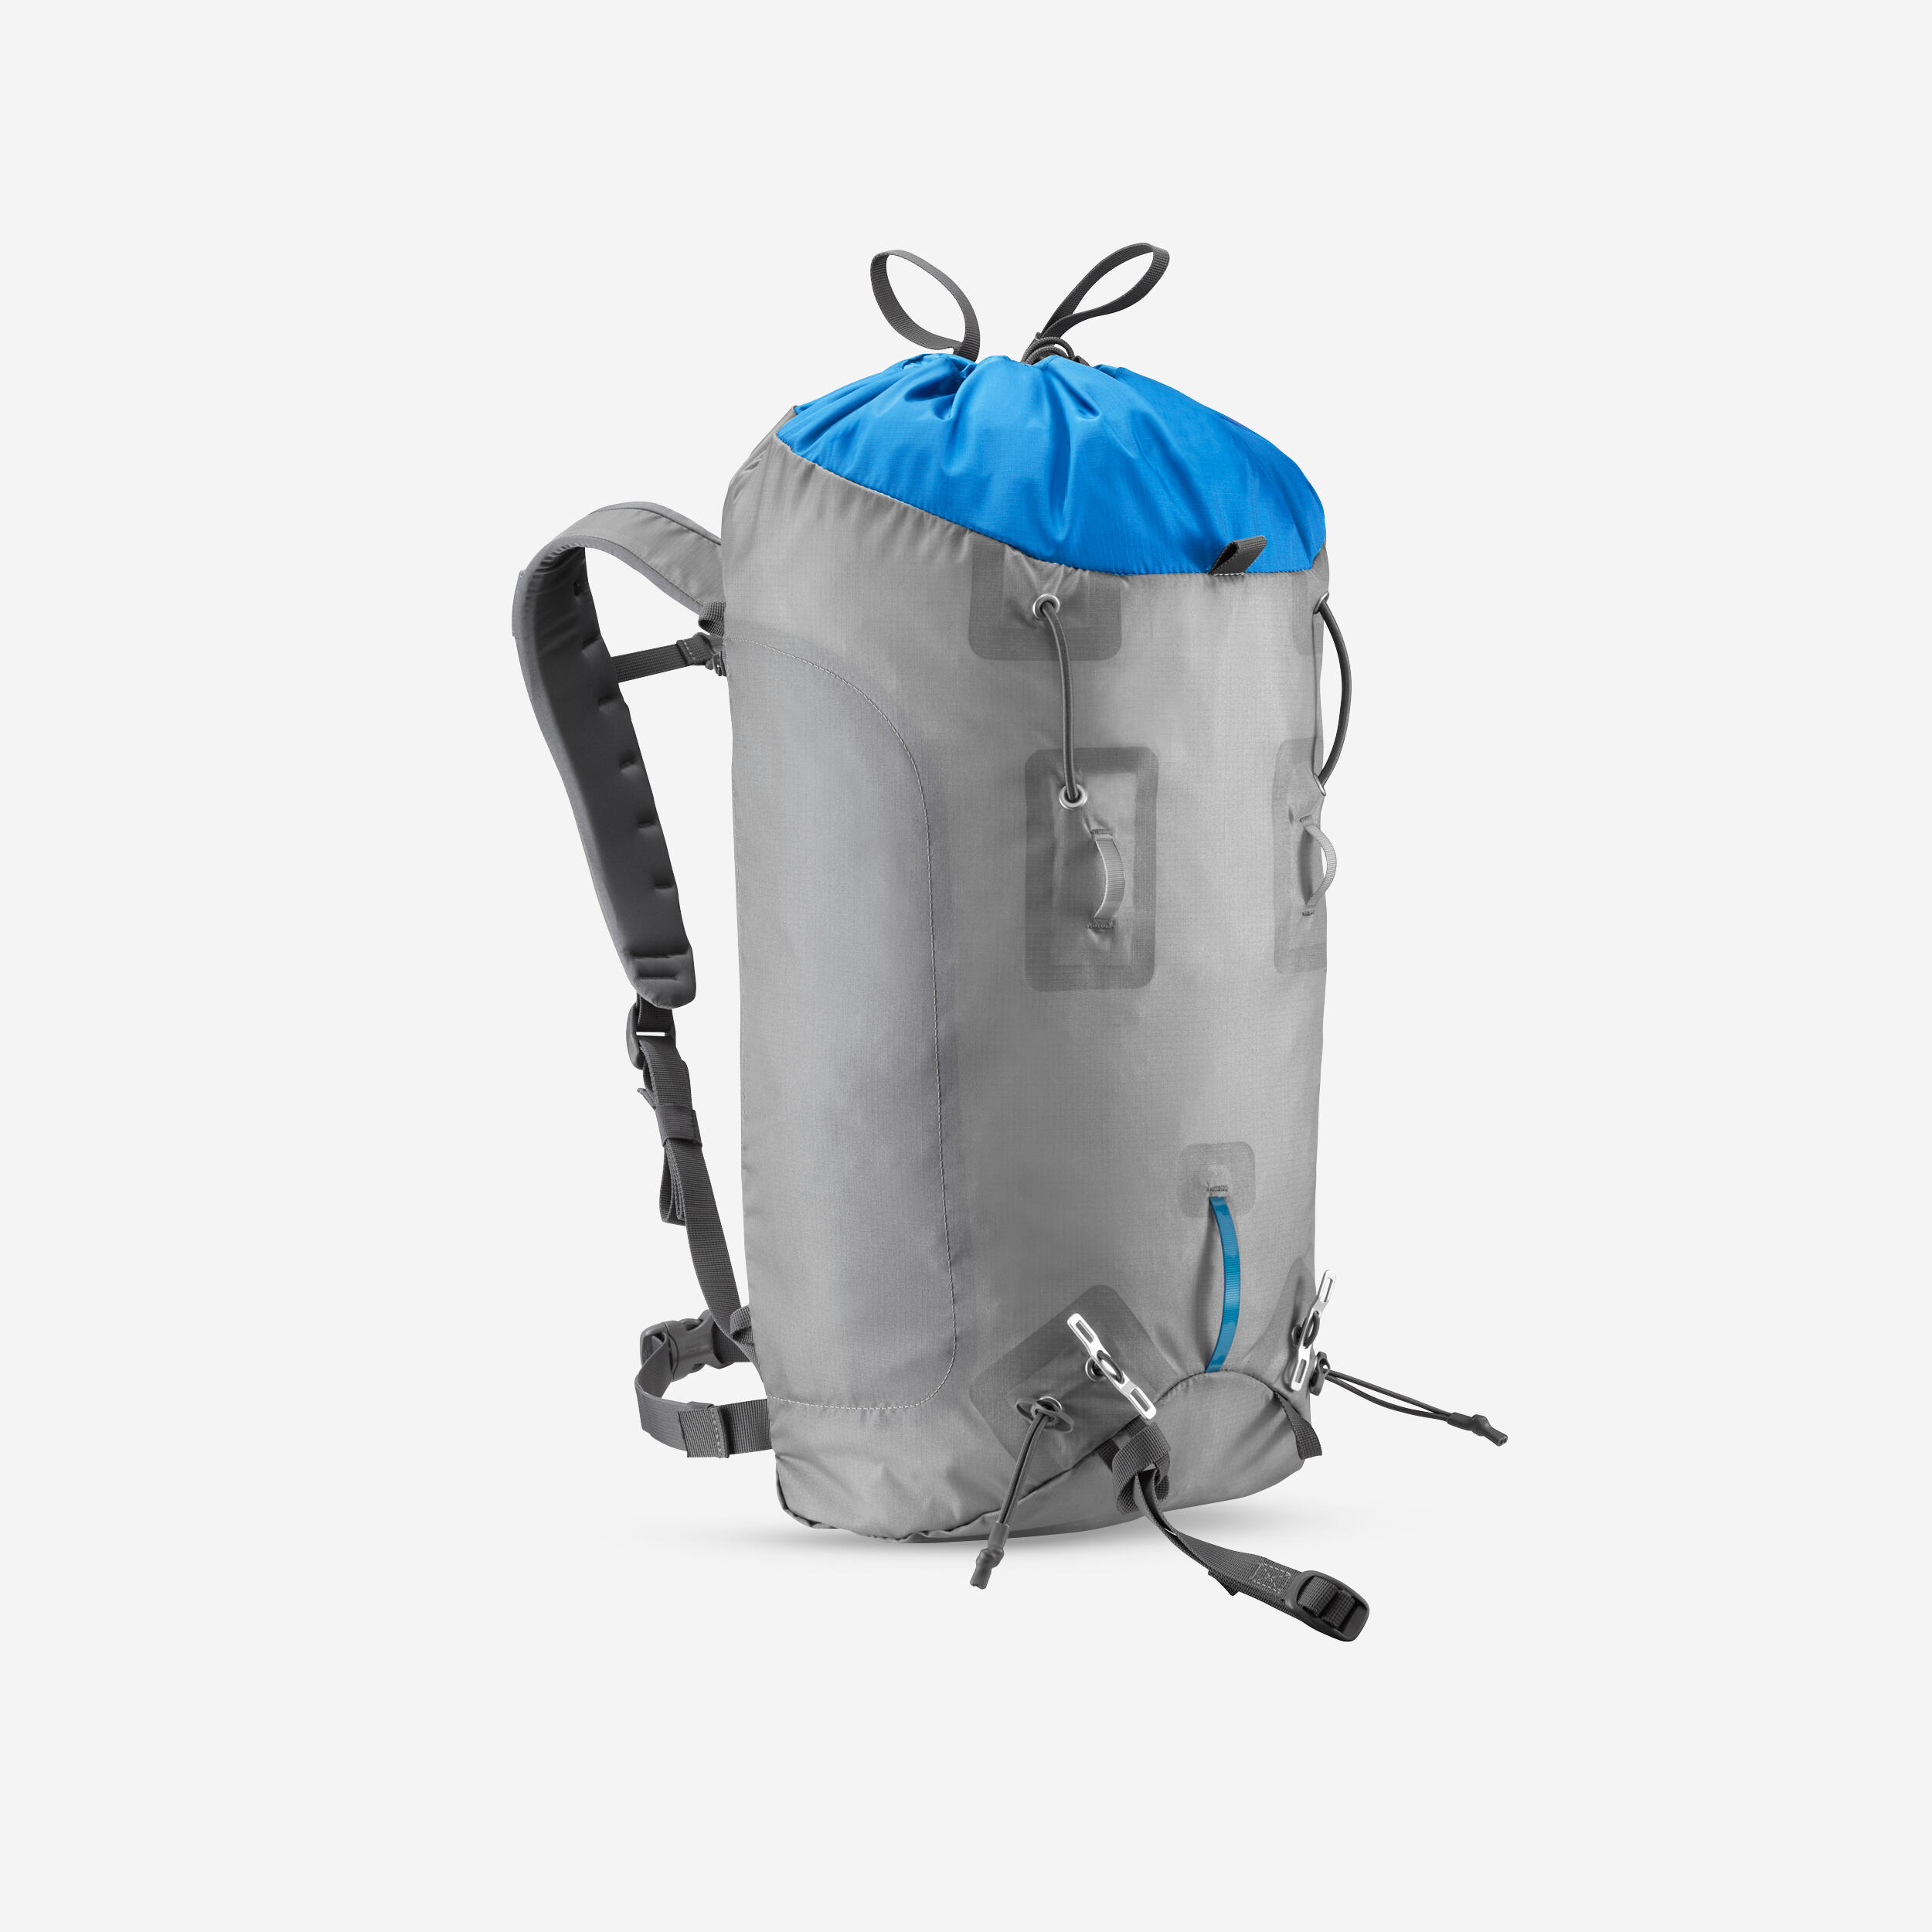 Mountaineering Backpack 33 Litres - SPRINT 33 BLUE SIMOND